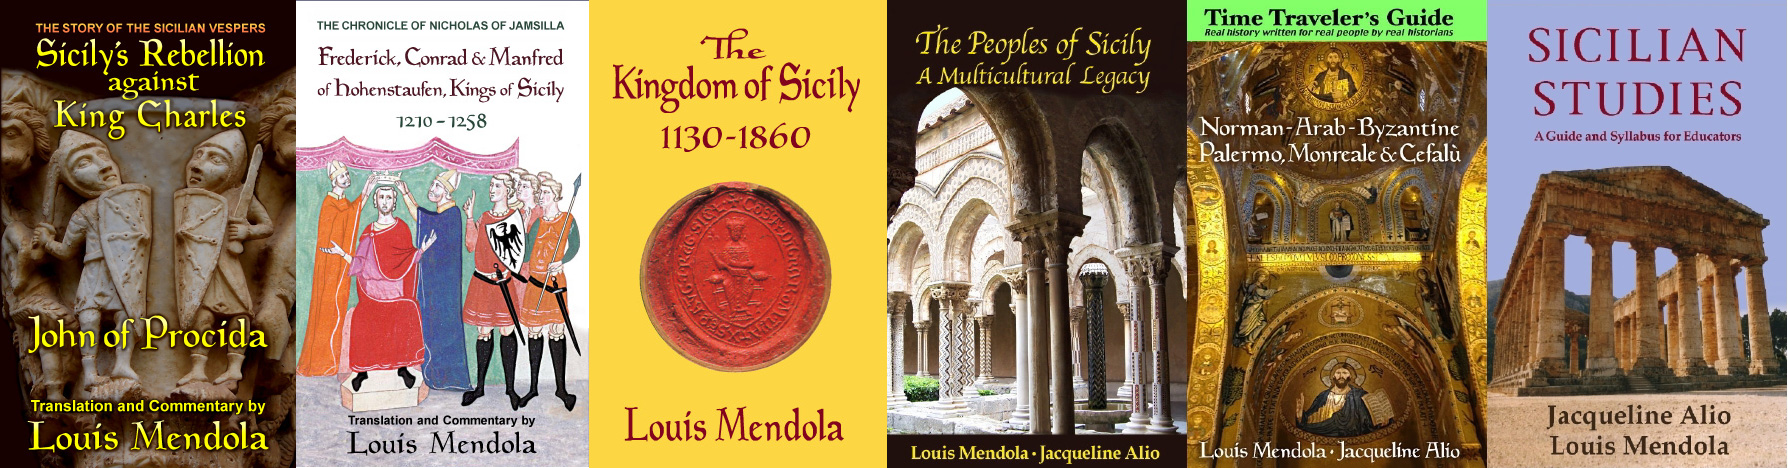 The Peoples of Sicily: A Multicultural Legacy by Louis Mendola and